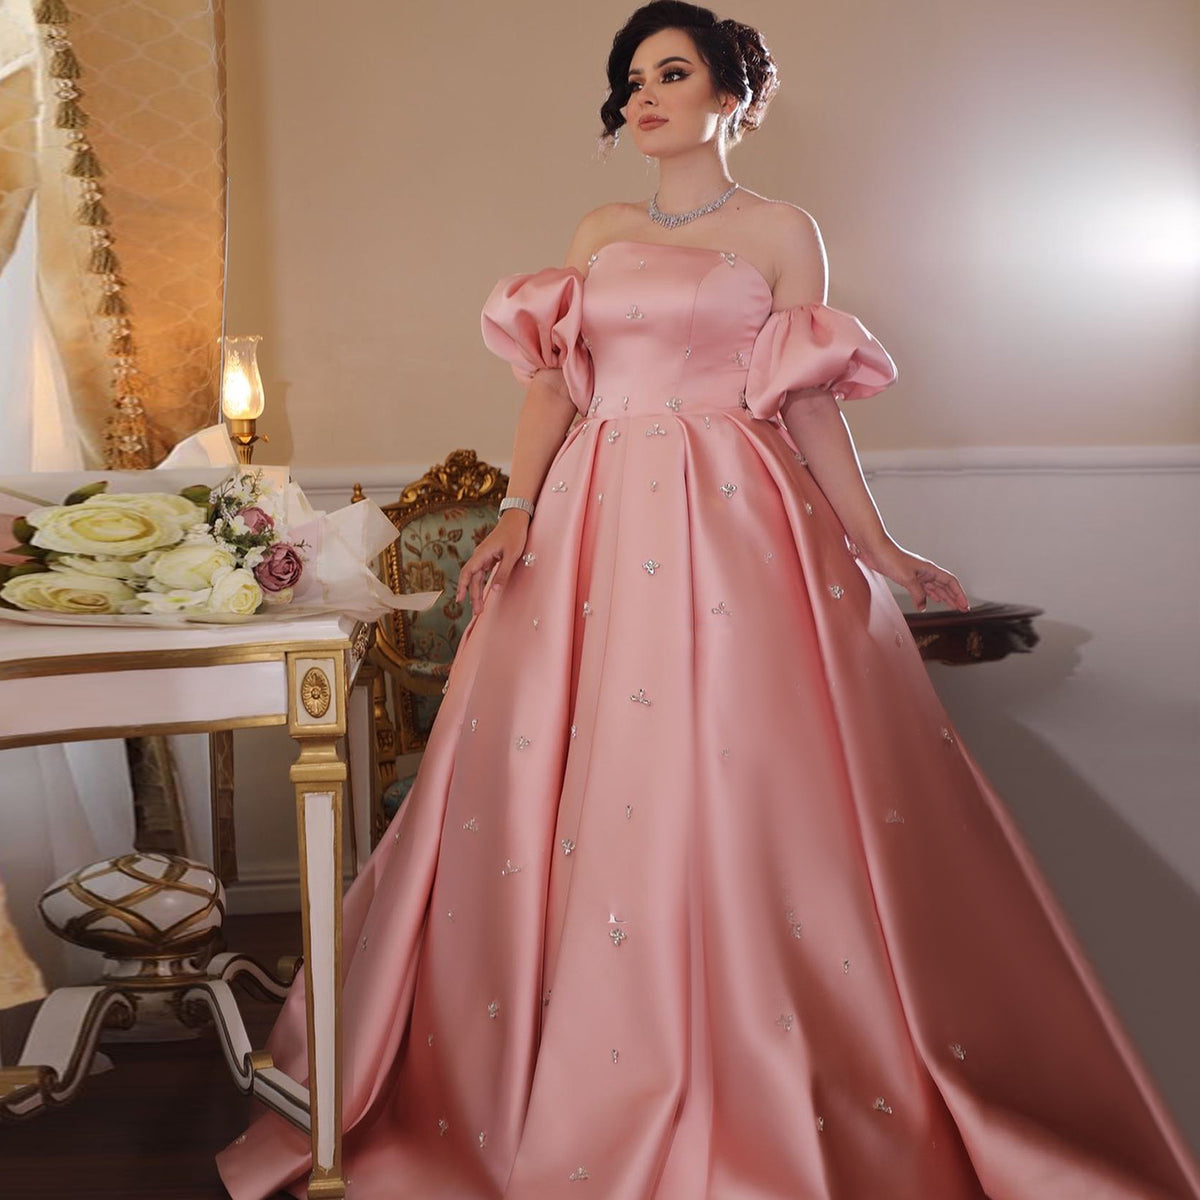 Sharon Said Arabic Women Blush Pink Satin Dubai Evening Dresses with Cap Sleeves Crystal Wedding Party Gowns SS442